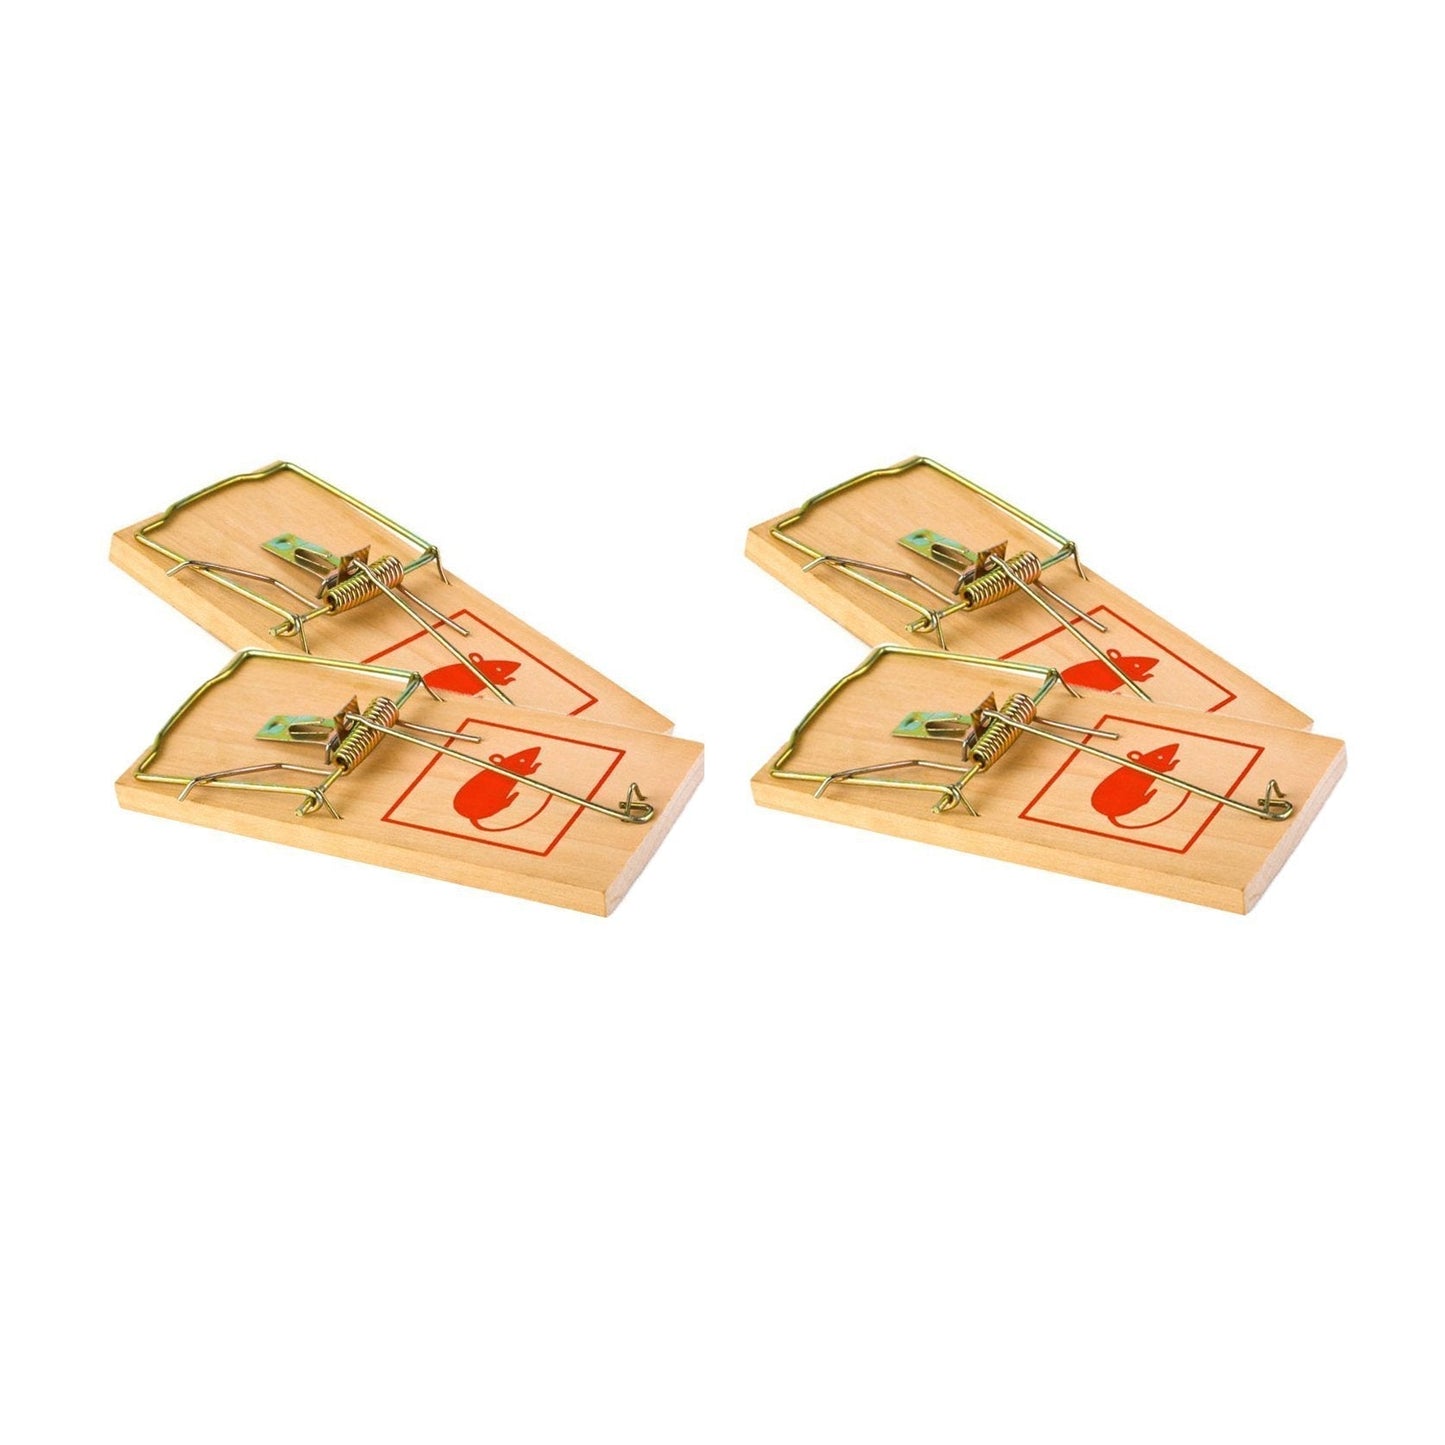 4 Pack Wooden Mouse Traps Easy Catch Home Pest Control Mouse Traps 2075 (Large Letter Rate)